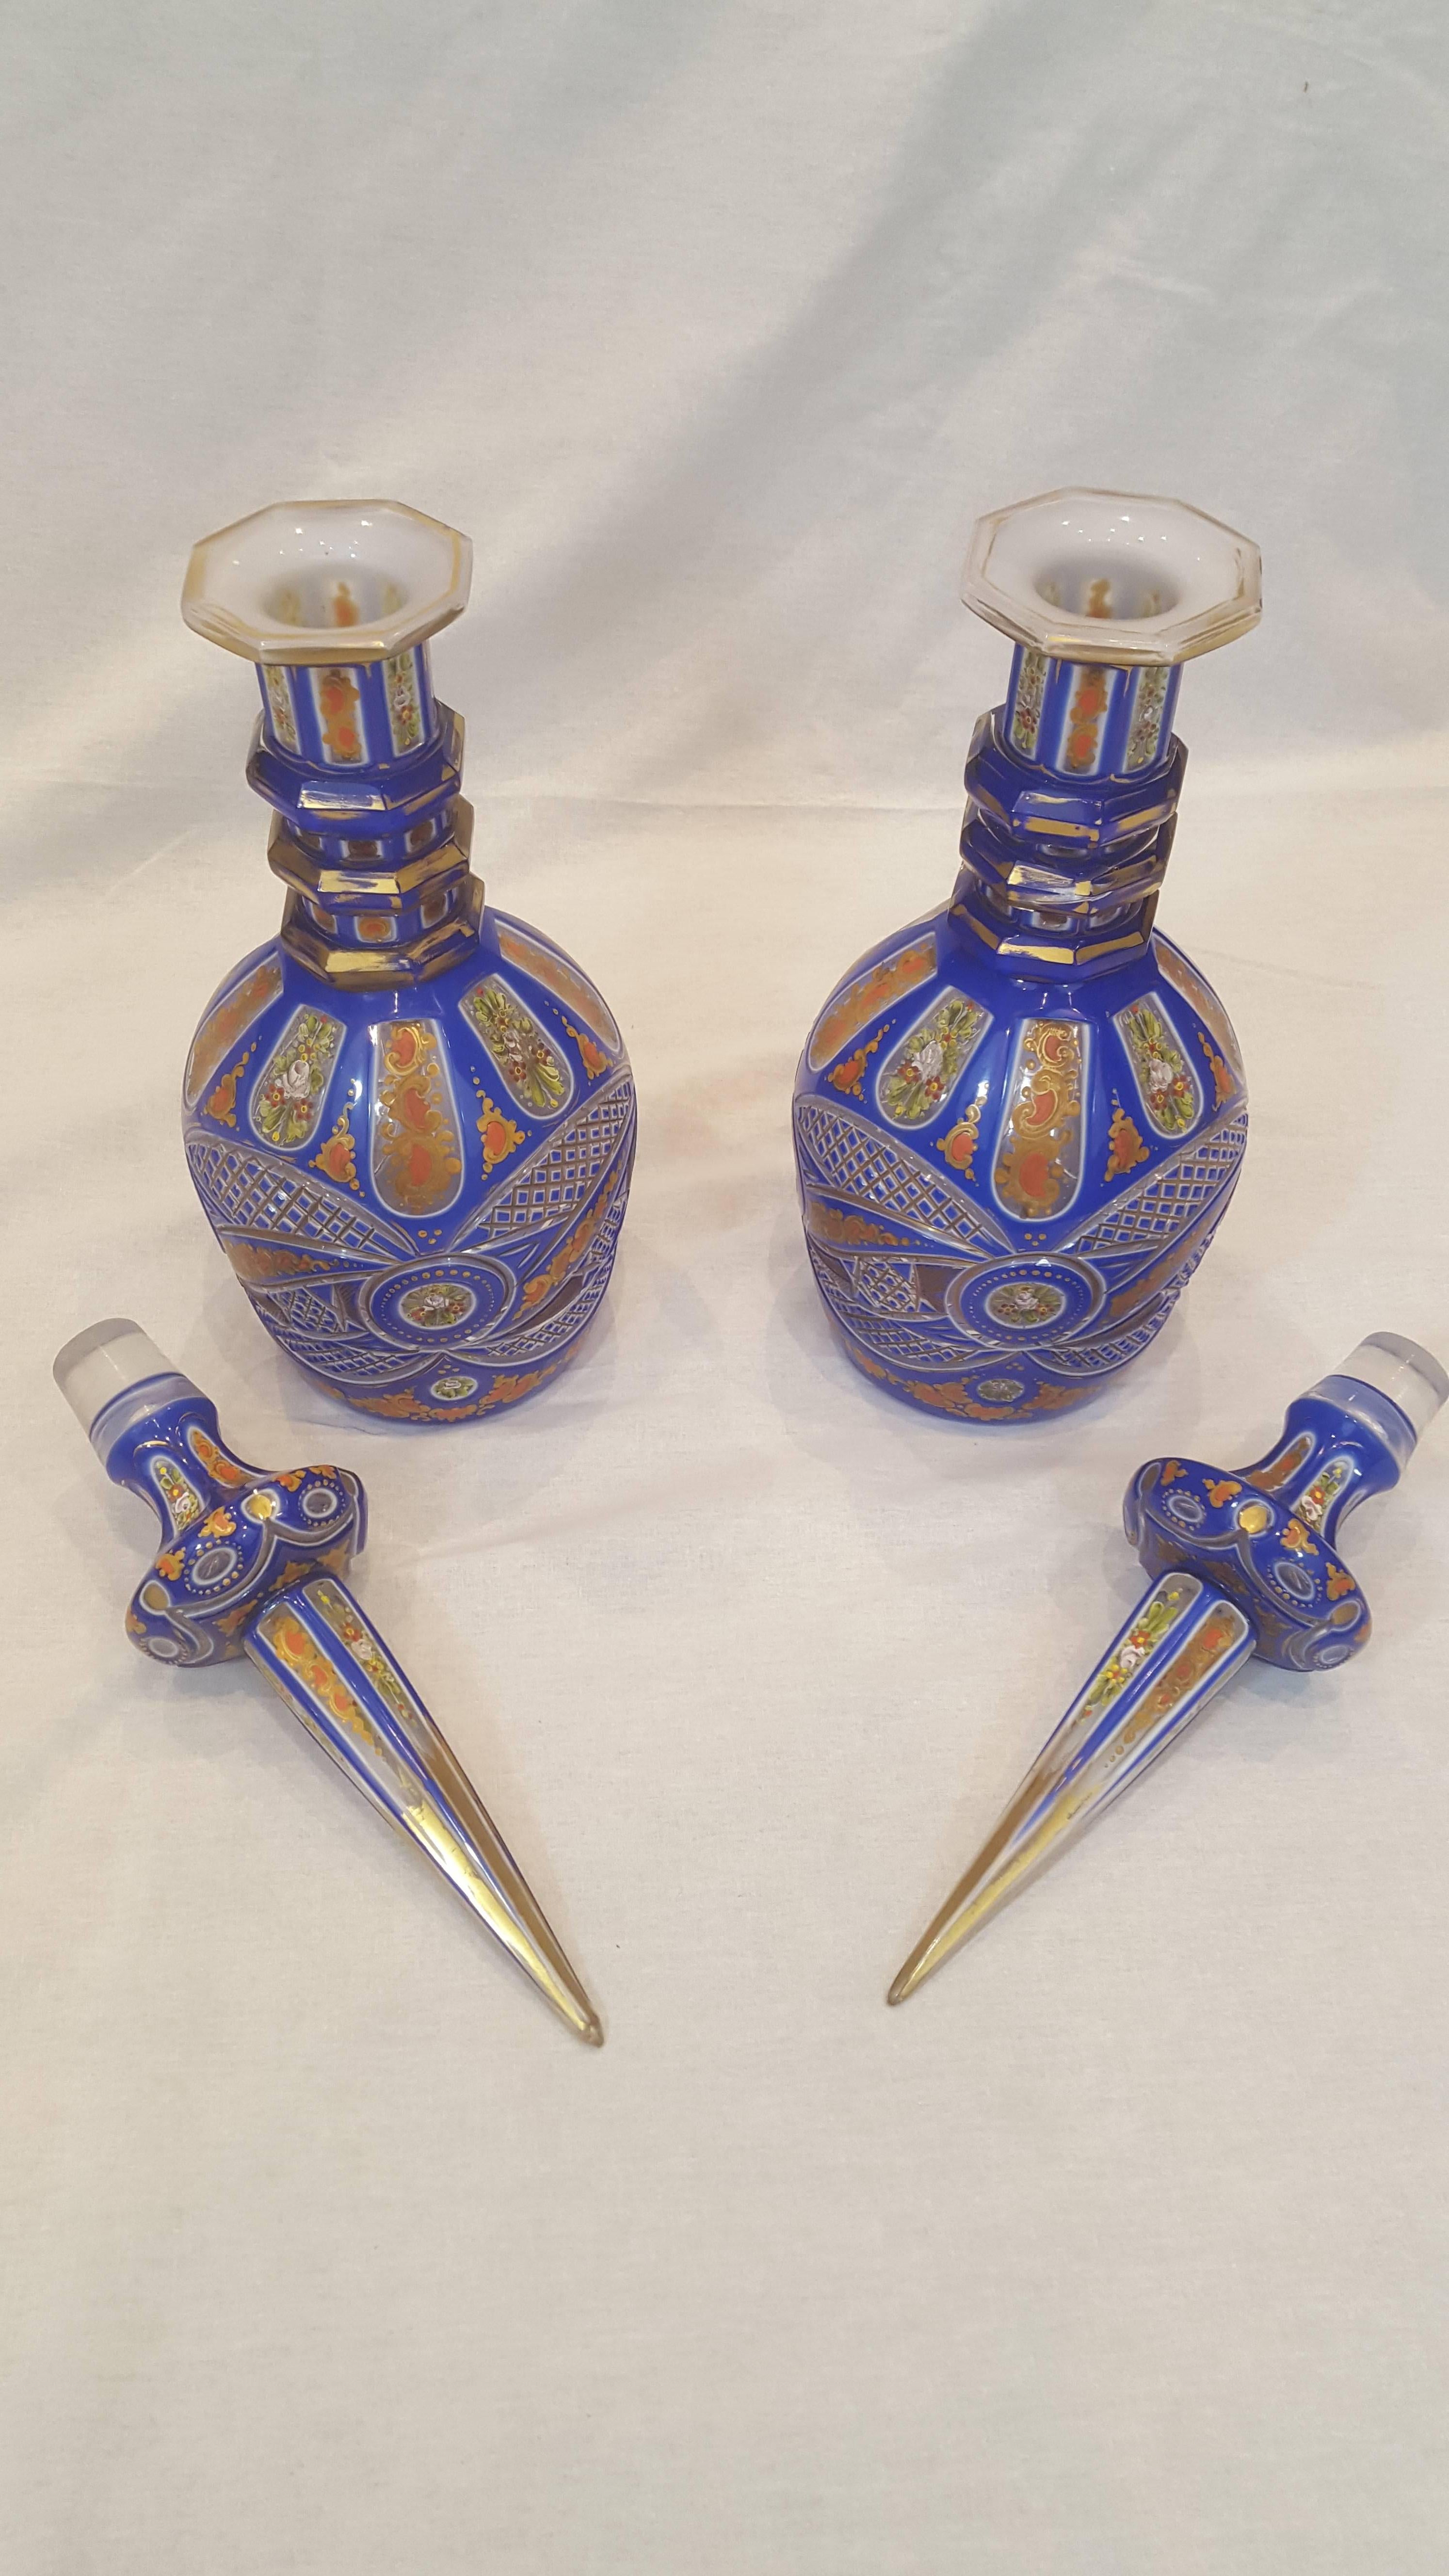 A pair of blue colour Bohemian cut and enamelled glass decanters with spire stoppers. They feature three rings around their necks, and are each decorated in a floral and foliate motif. Made for the Persian market.